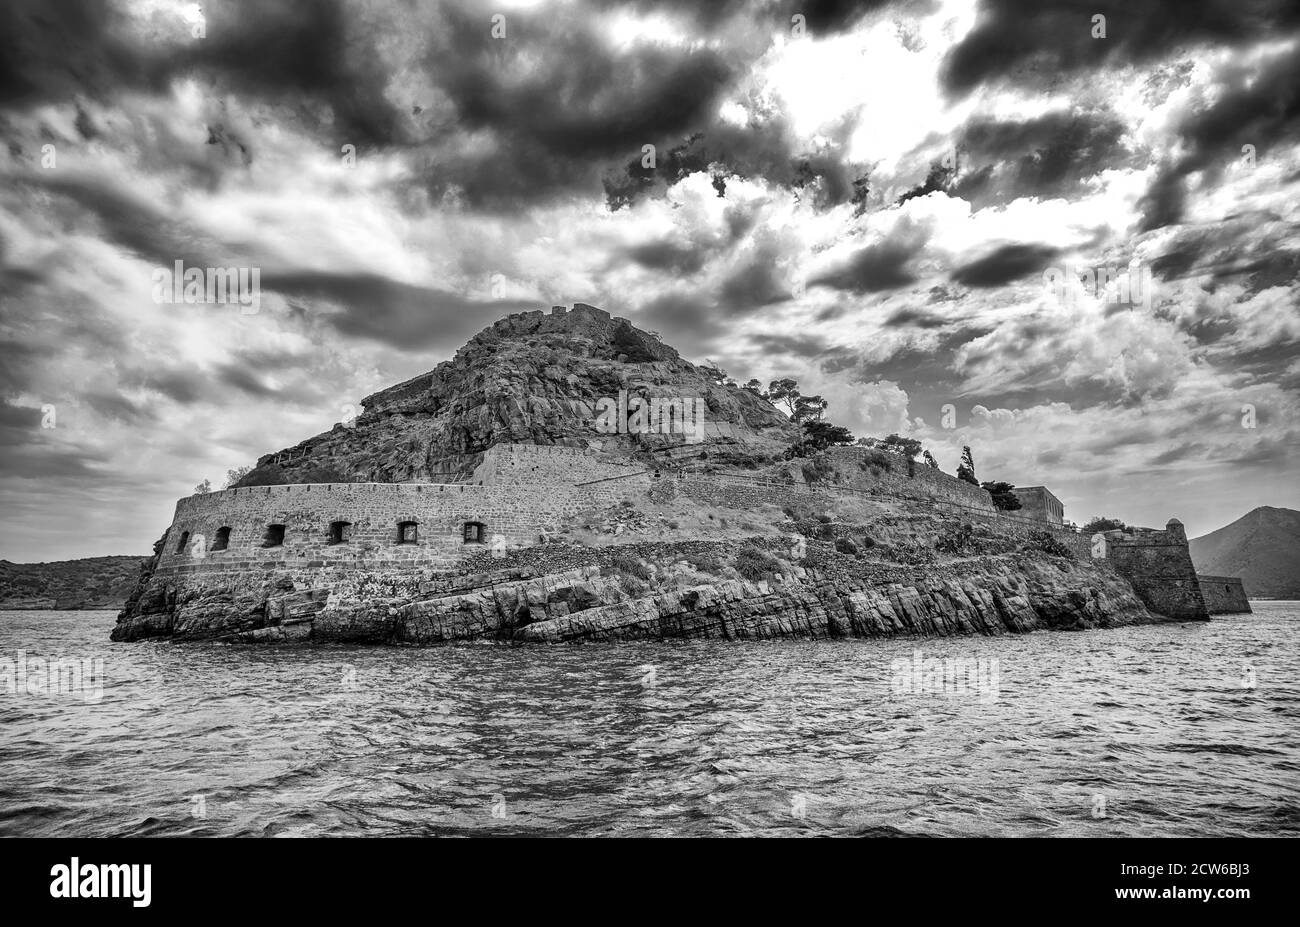 Ancient ruins of a fortified leper colony. The fortress was built by ...